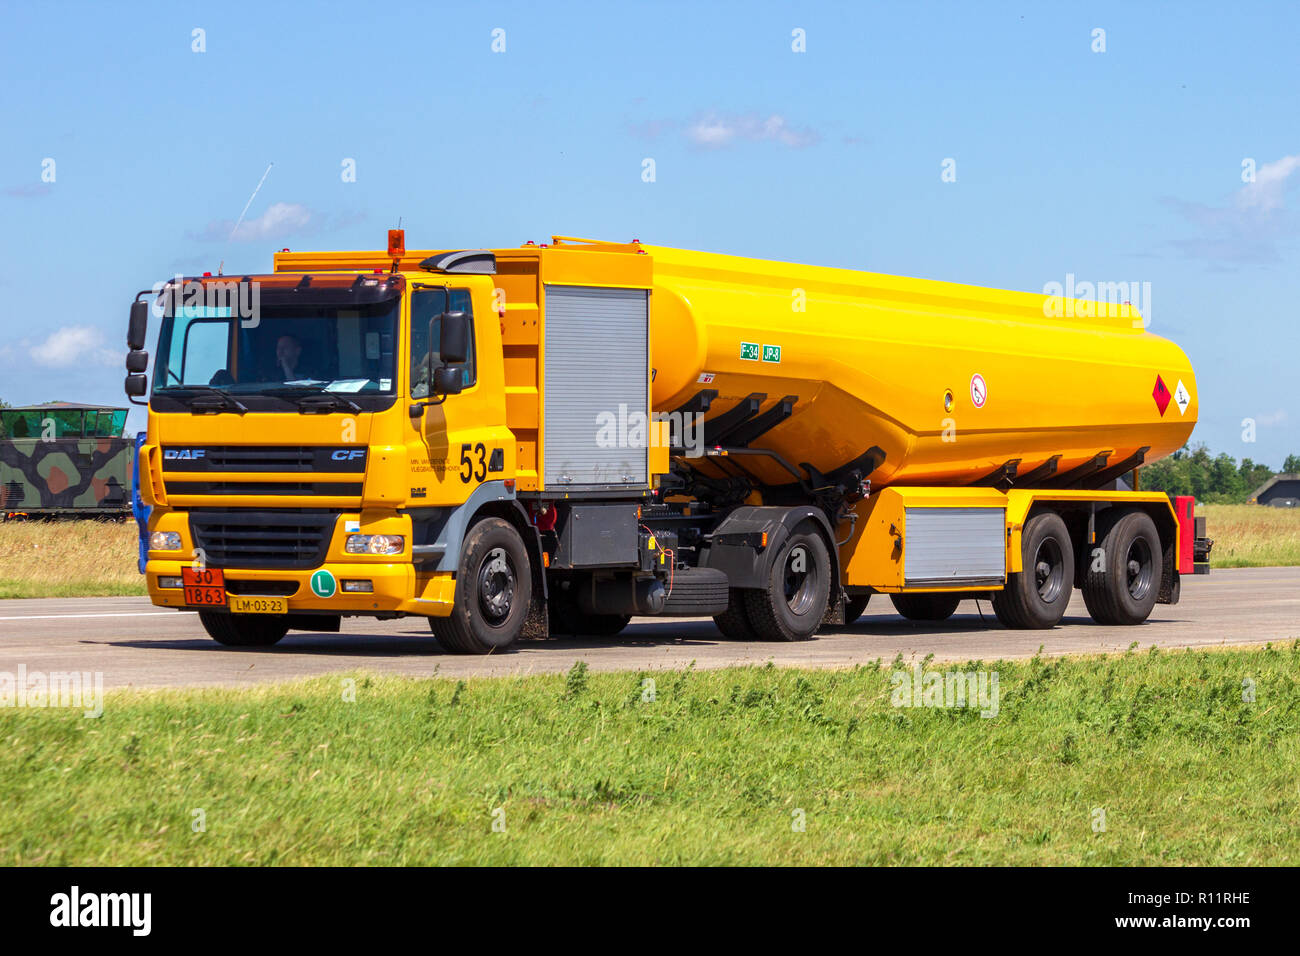 VOLKEL, THE NETHERLANDS - JUN 15, 2013: Mobile kerosine refueling vehicle driving on the taxi track of Volkel airbase Stock Photo